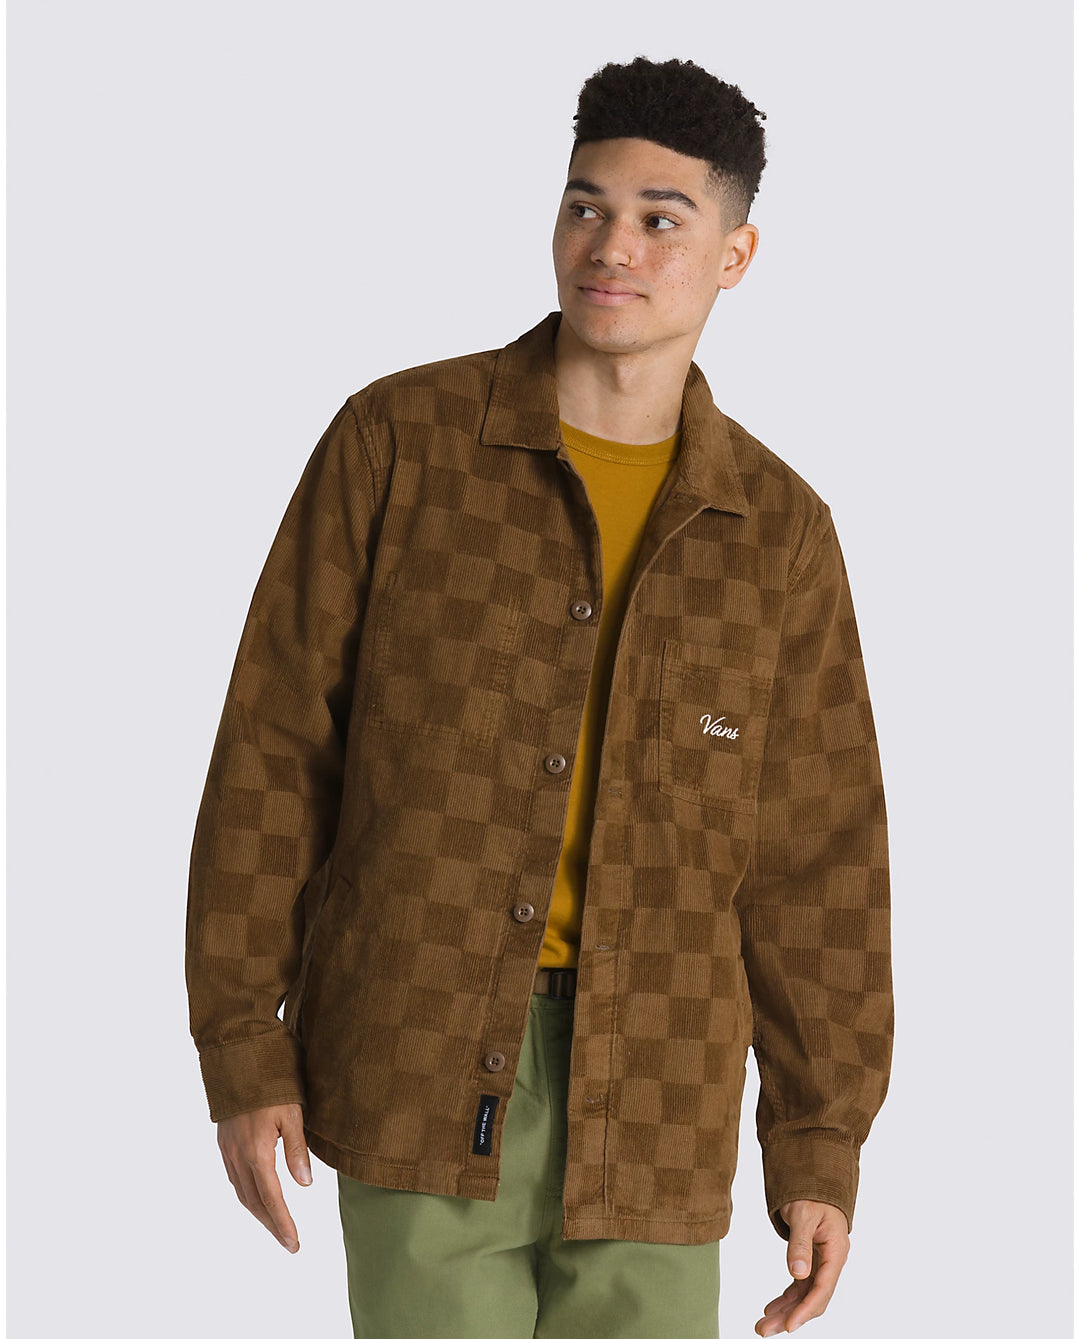 Woll Corduroy Long Sleeve Shirt in Sepia